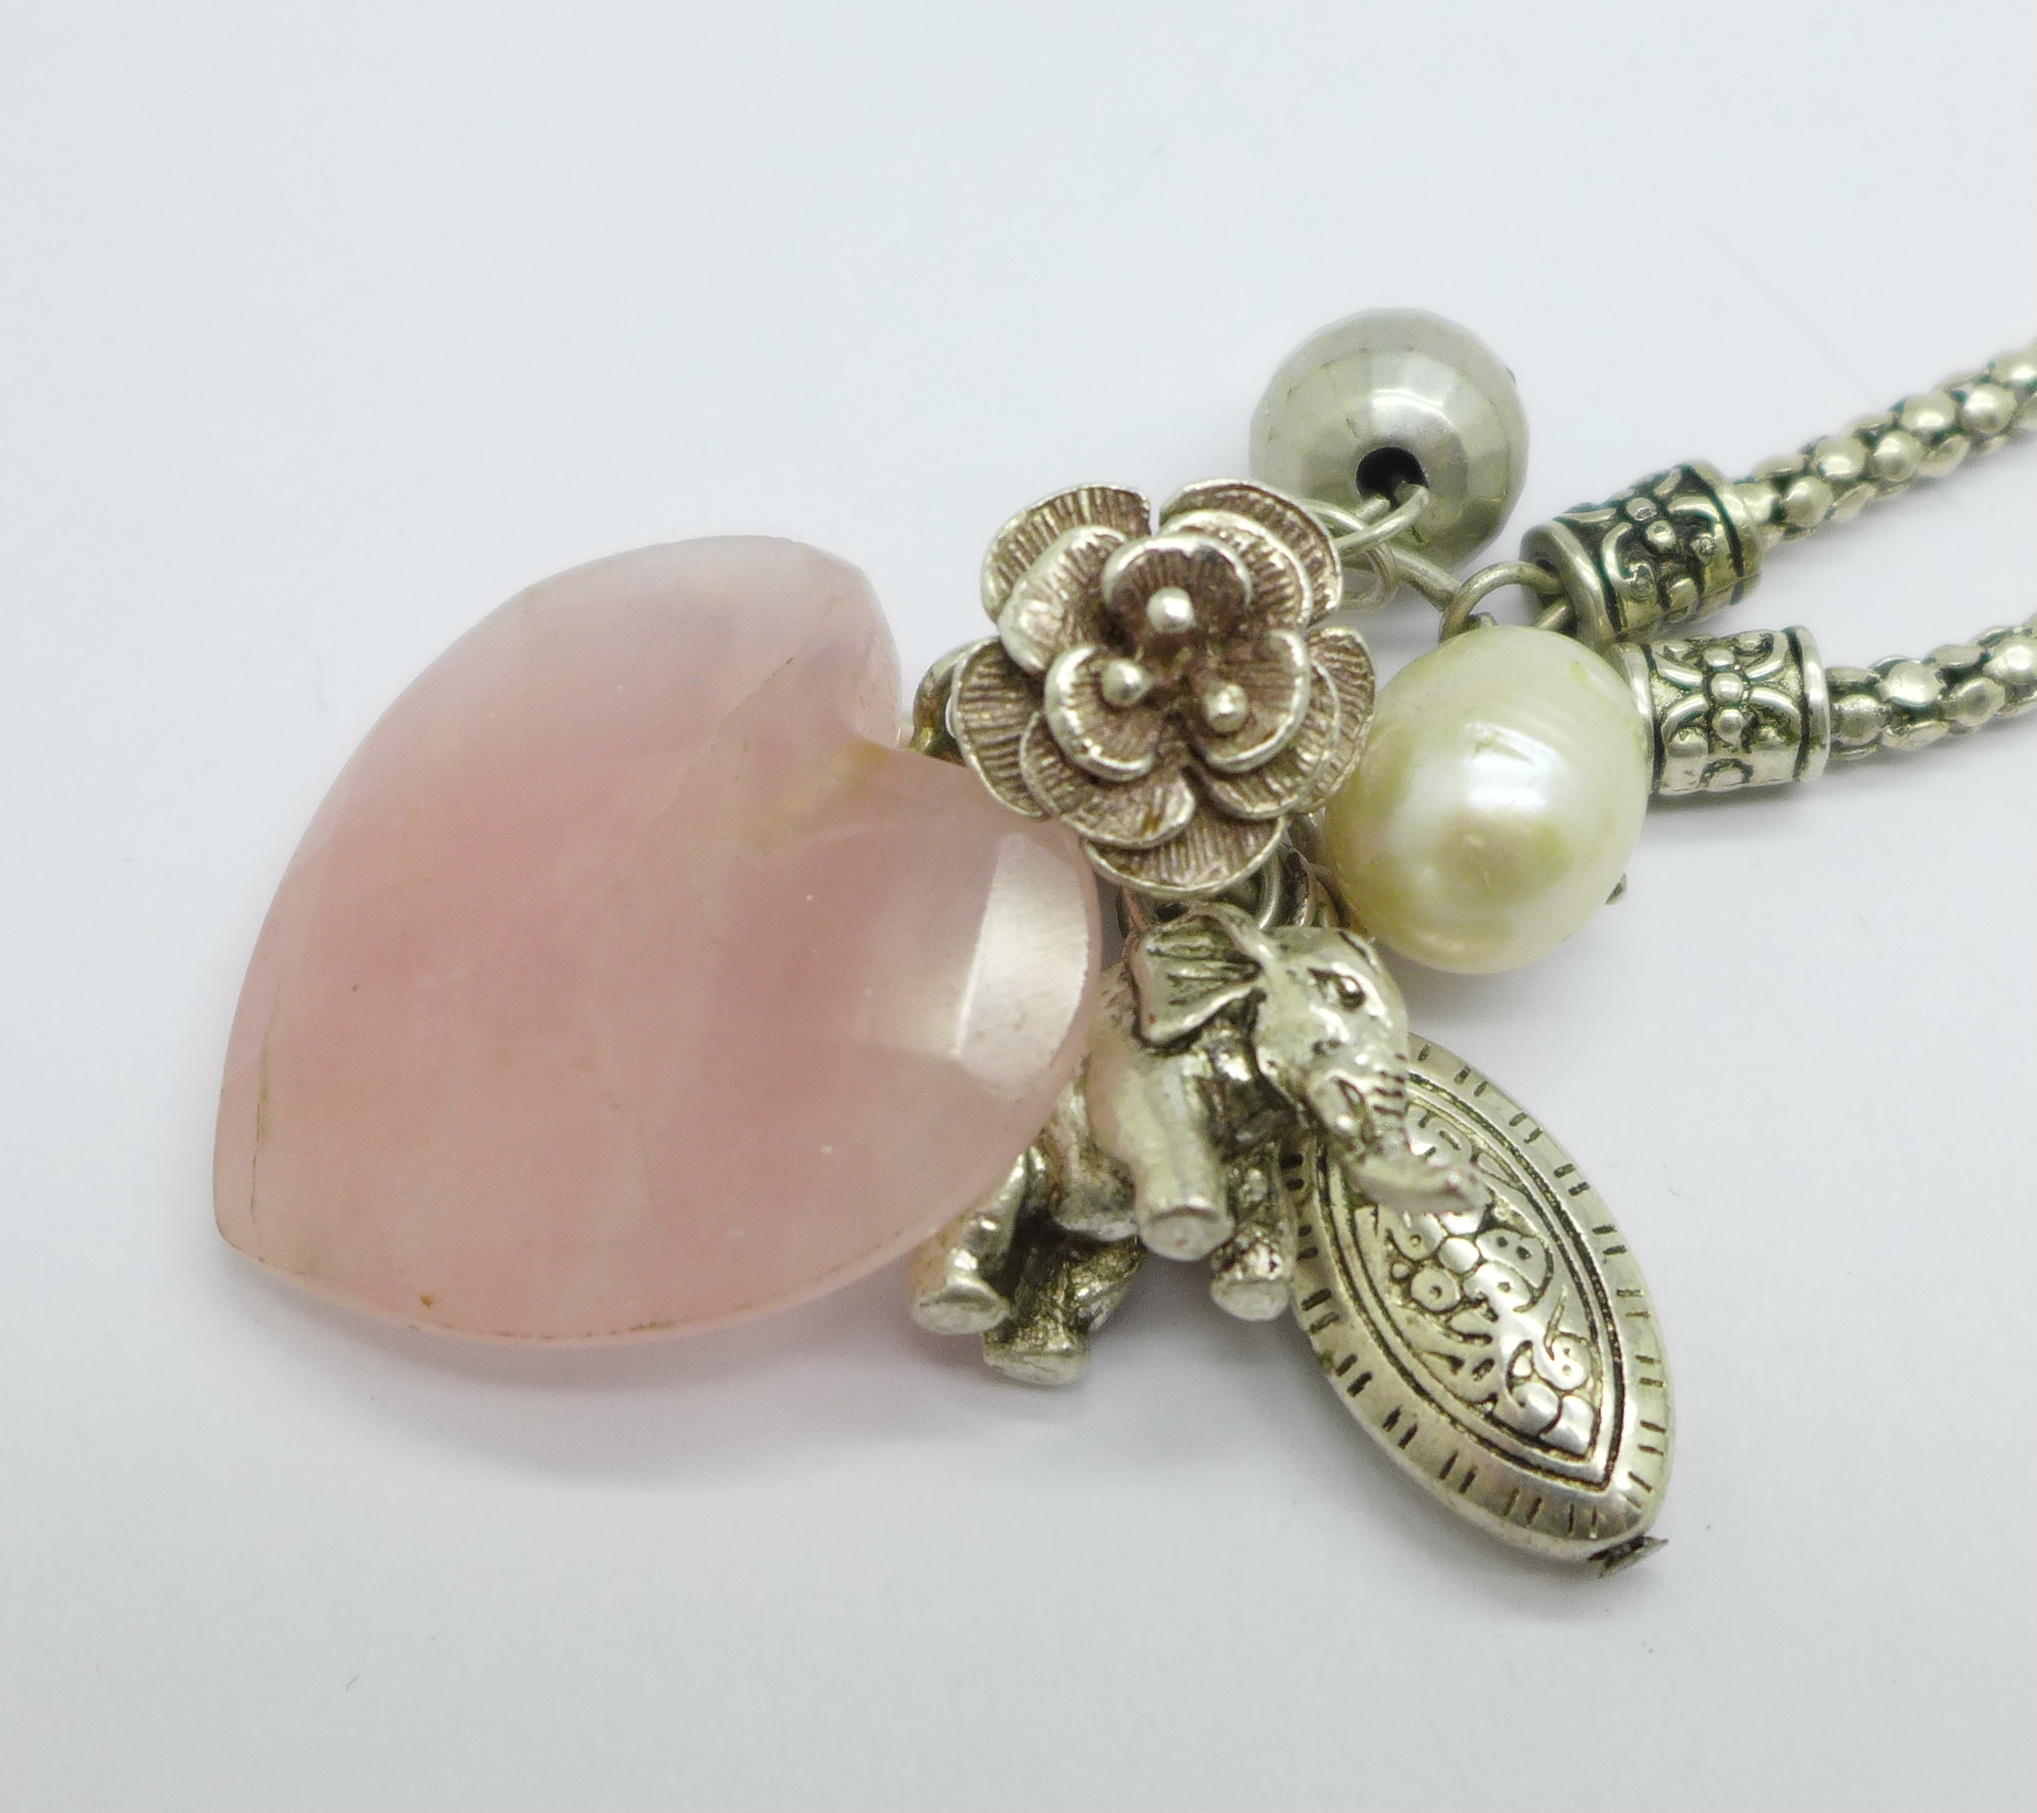 An Azuni designer necklace with pink quartz, baroque pearl and charms - Image 2 of 3